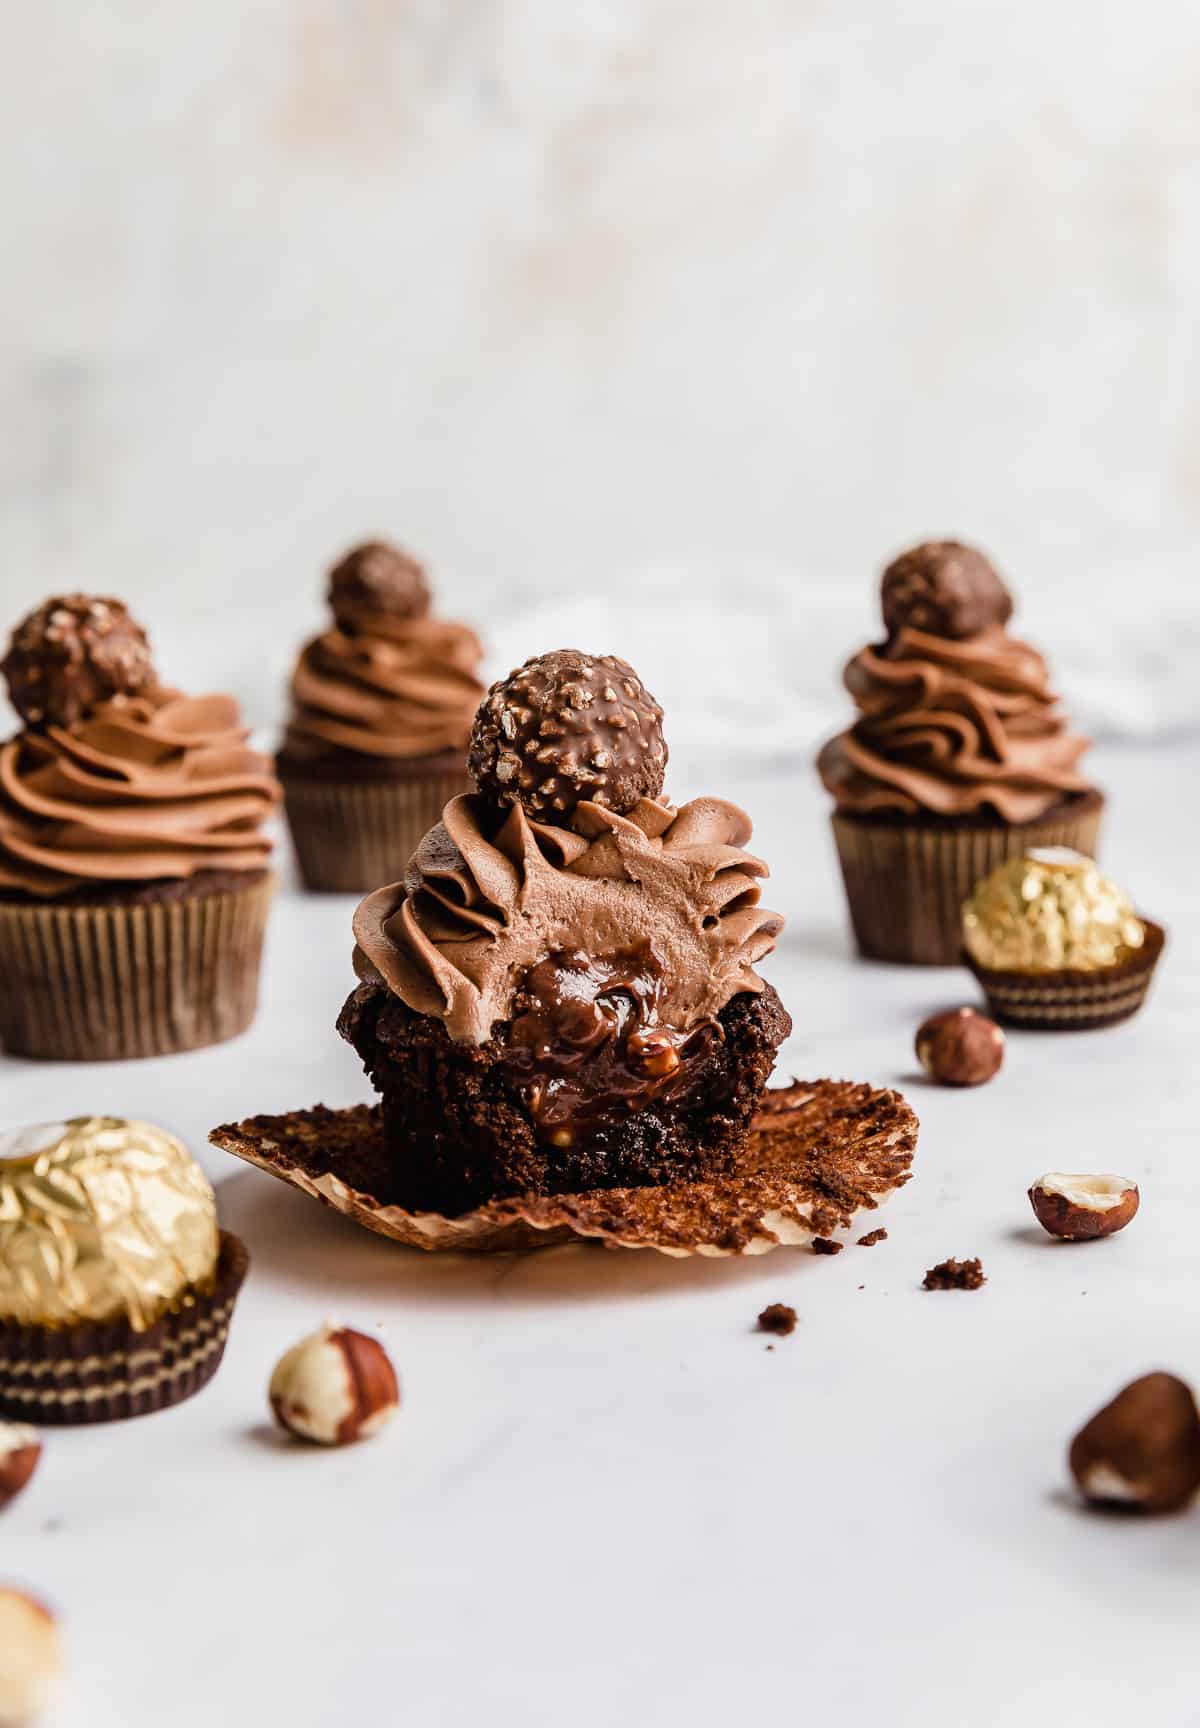 A Ferrero Rocher Cupcake with a bite taken out of it showing the inside of the cupcake filled with Nutella.